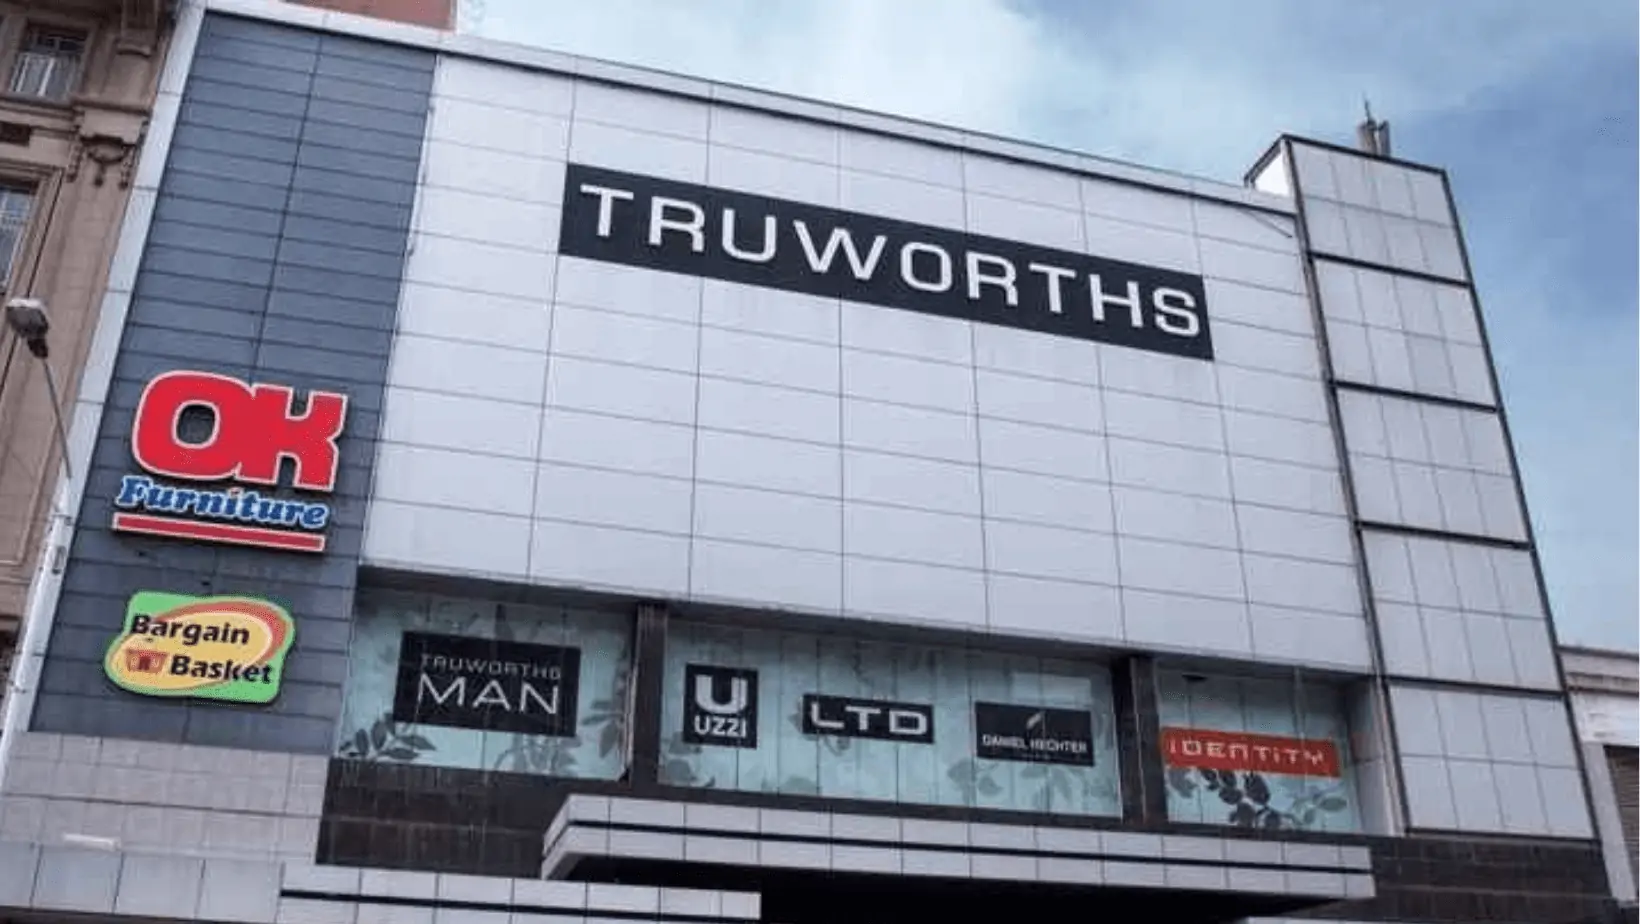 Truworths International Ltd Reports Strong Financial Performance and Increased Dividend